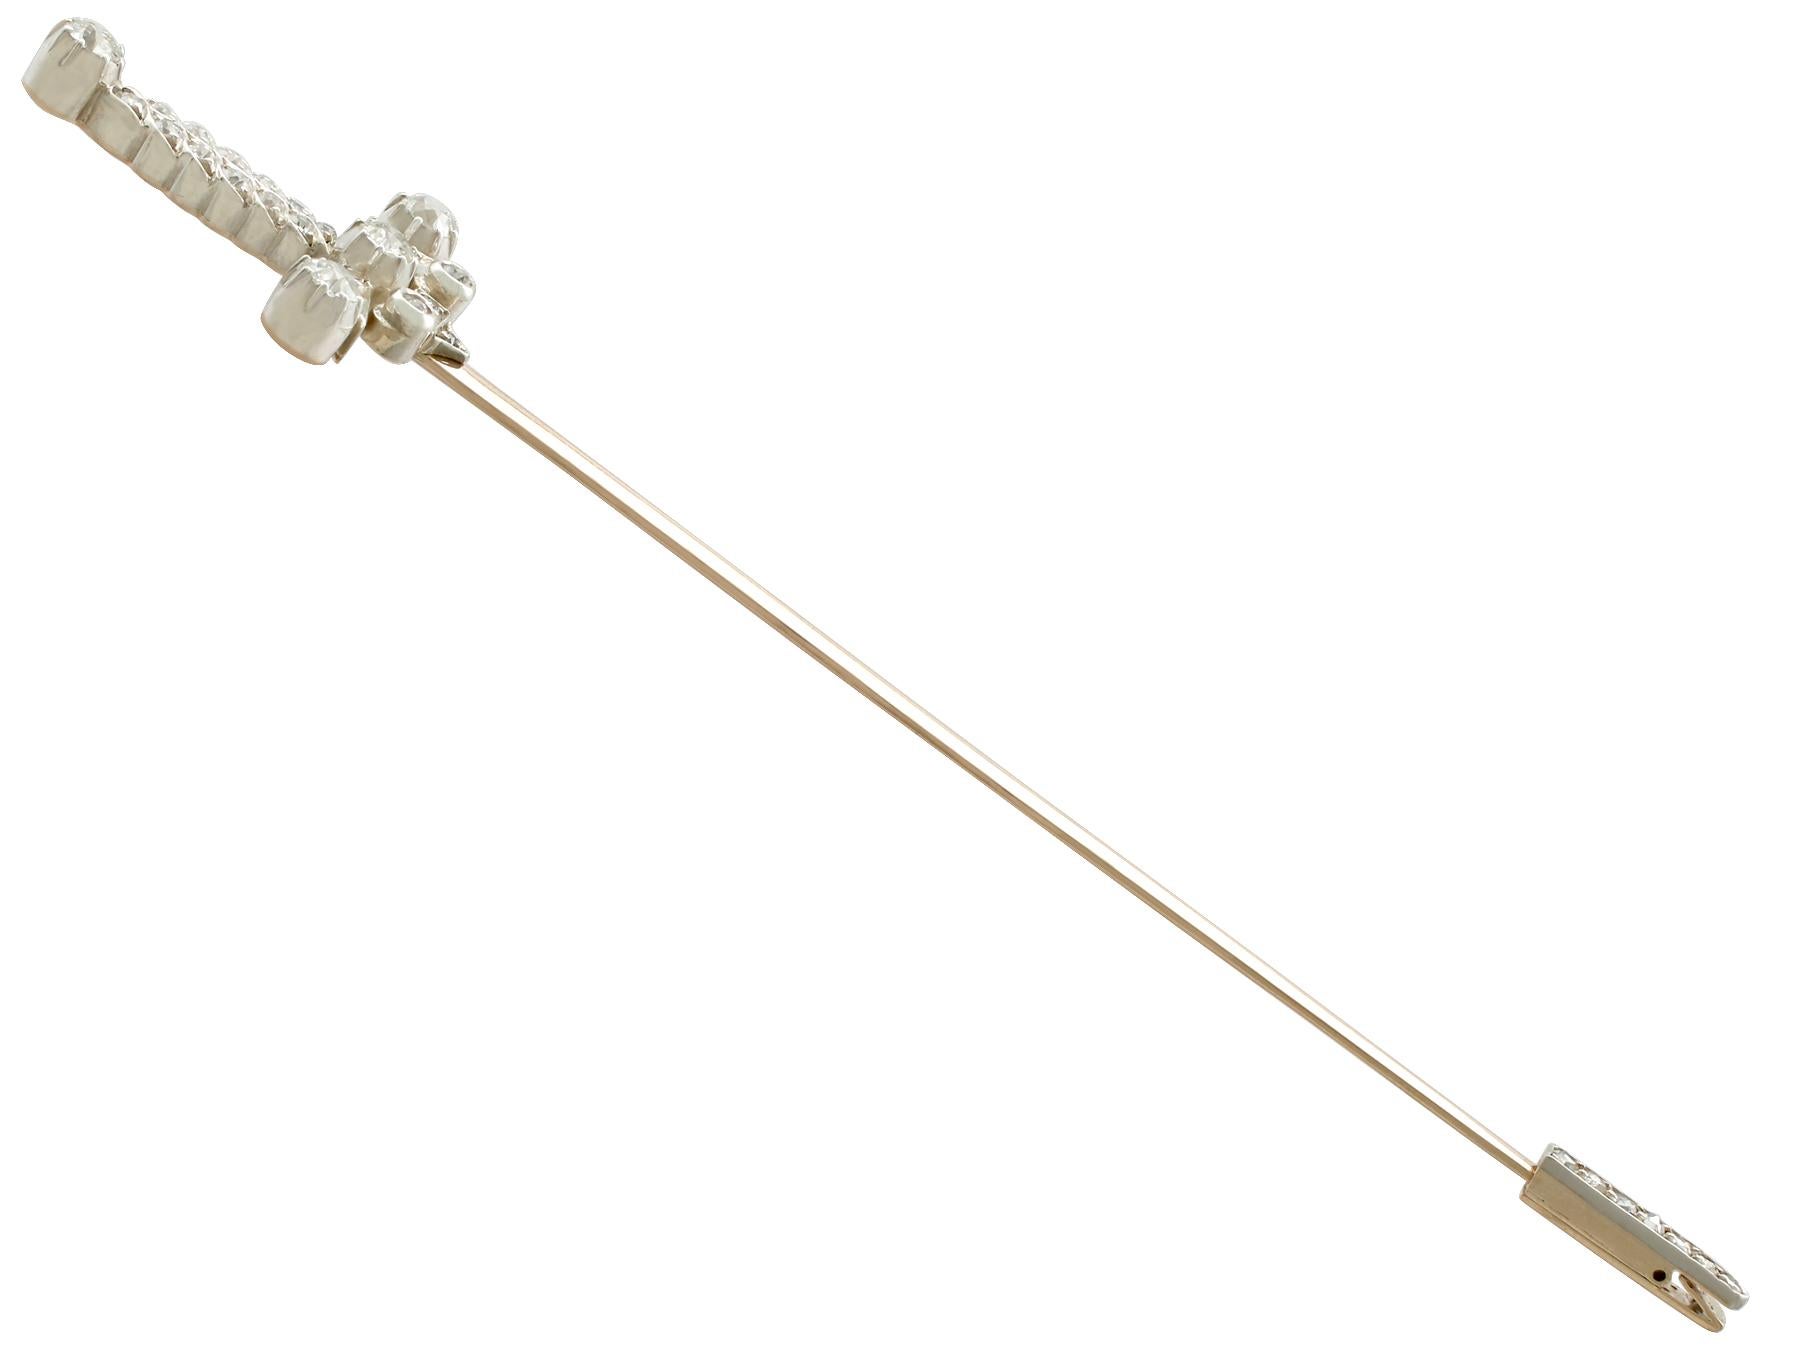 A large, fine and stunning antique Edwardian 1.59 carat diamond and 9k yellow gold, silver set, jabot pin brooch in the form of a sword; part of our diverse diamond jewelry and estate jewelry collections

This large and stunning antique Edwardian